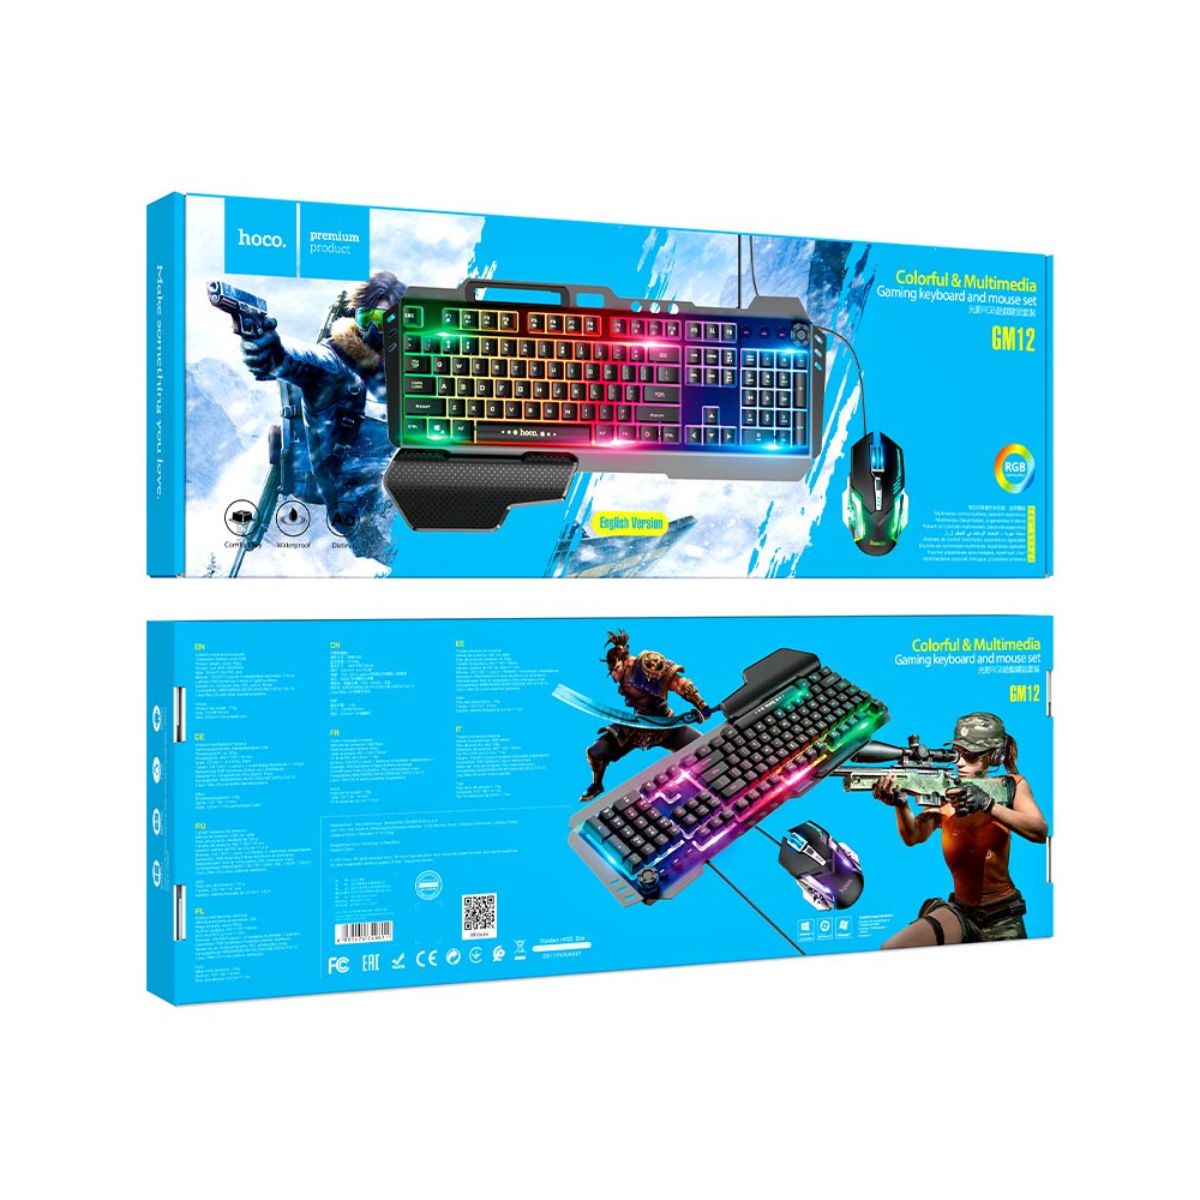 Hoco GM12 Light and Shadow RGB Gaming Keyboard And Mouse Set(general english version) - Black